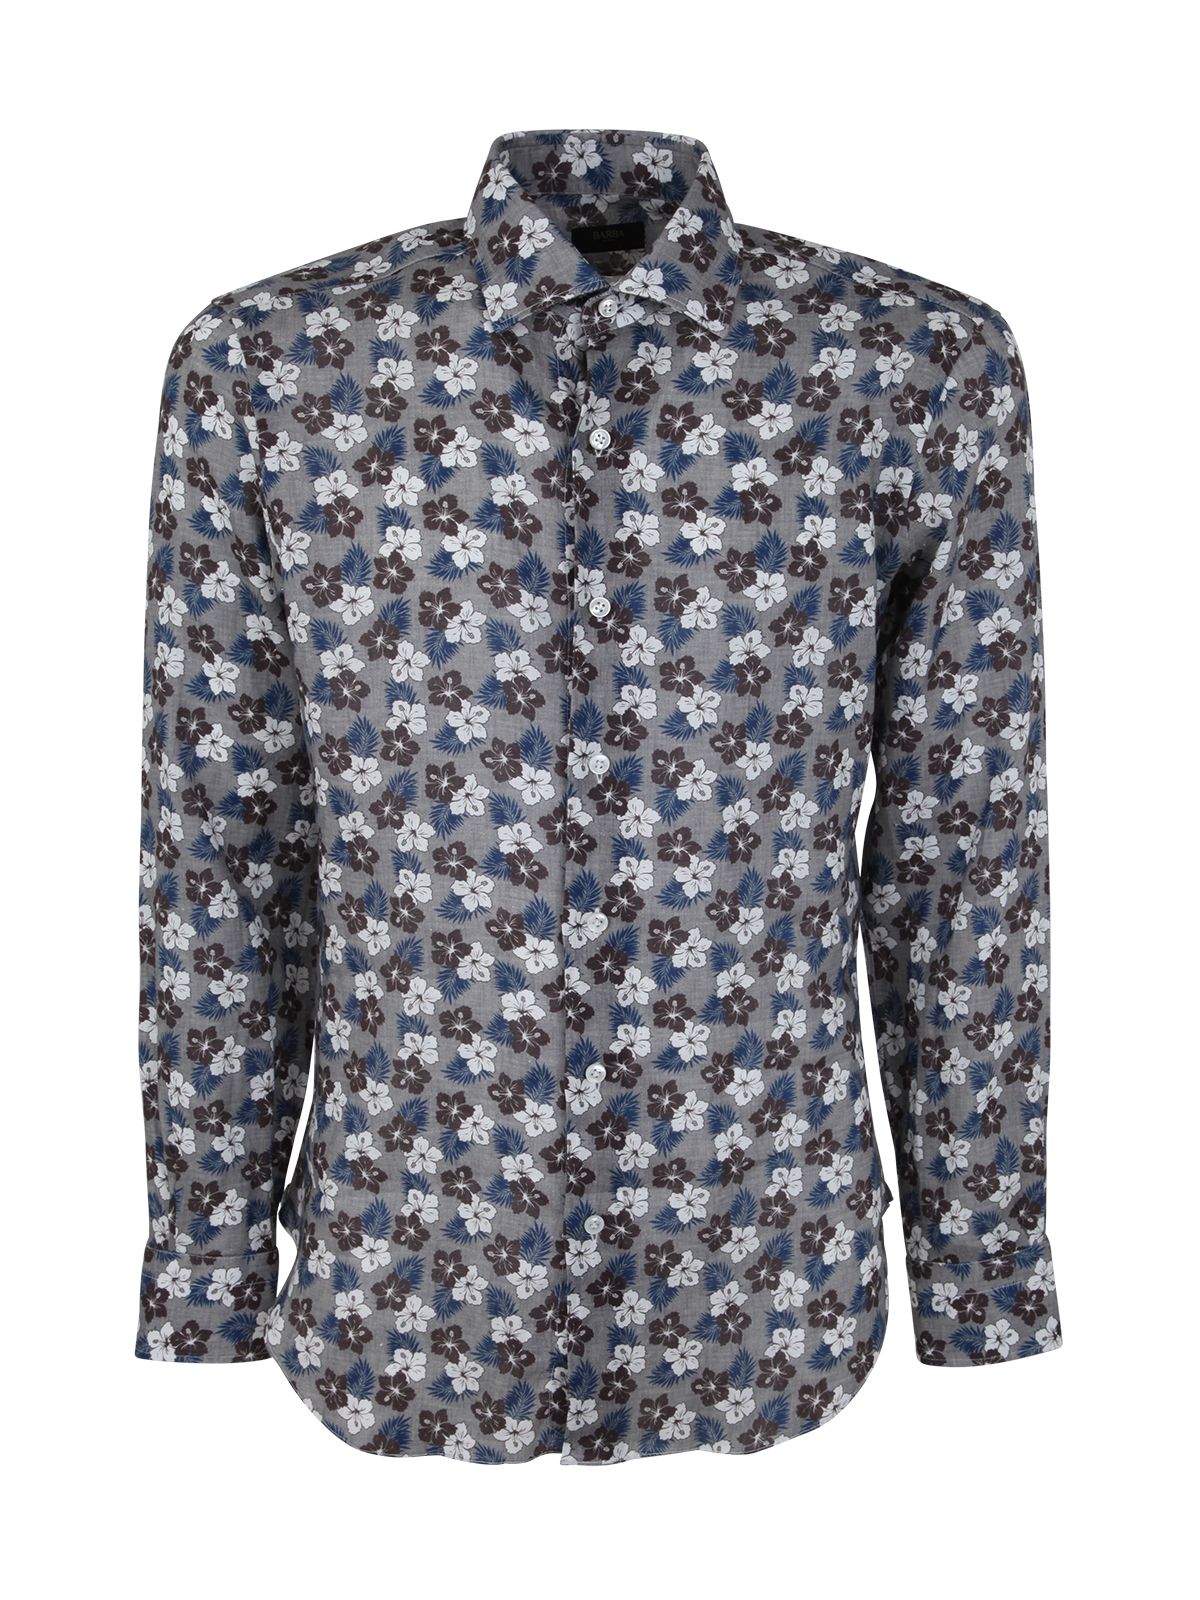 Barba Napoli Floral Patterned Shirt In Grey Brown